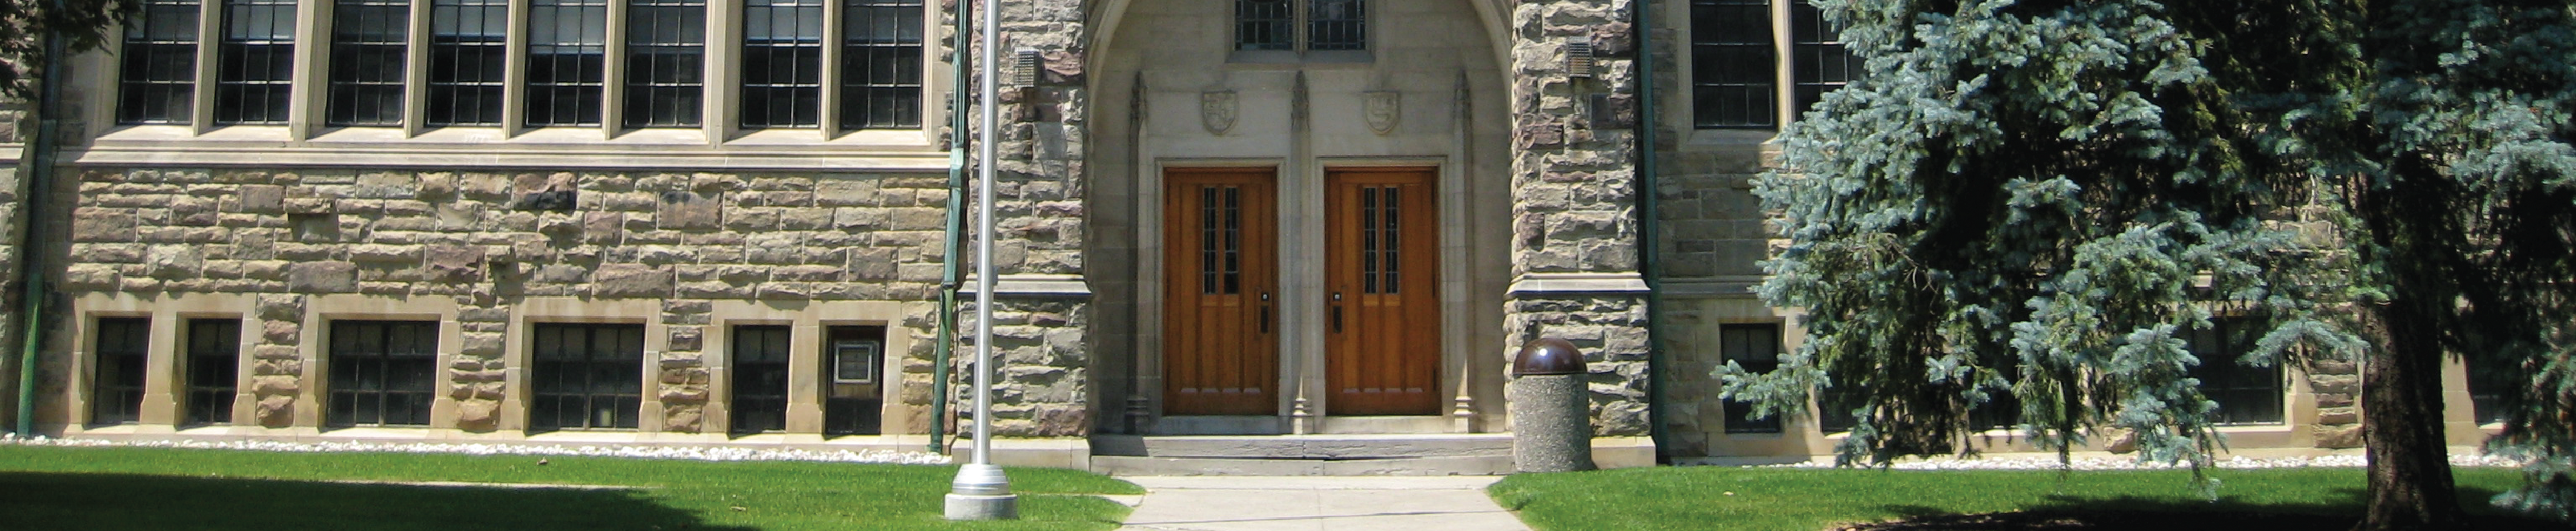 An image of the front entrance of the school building.